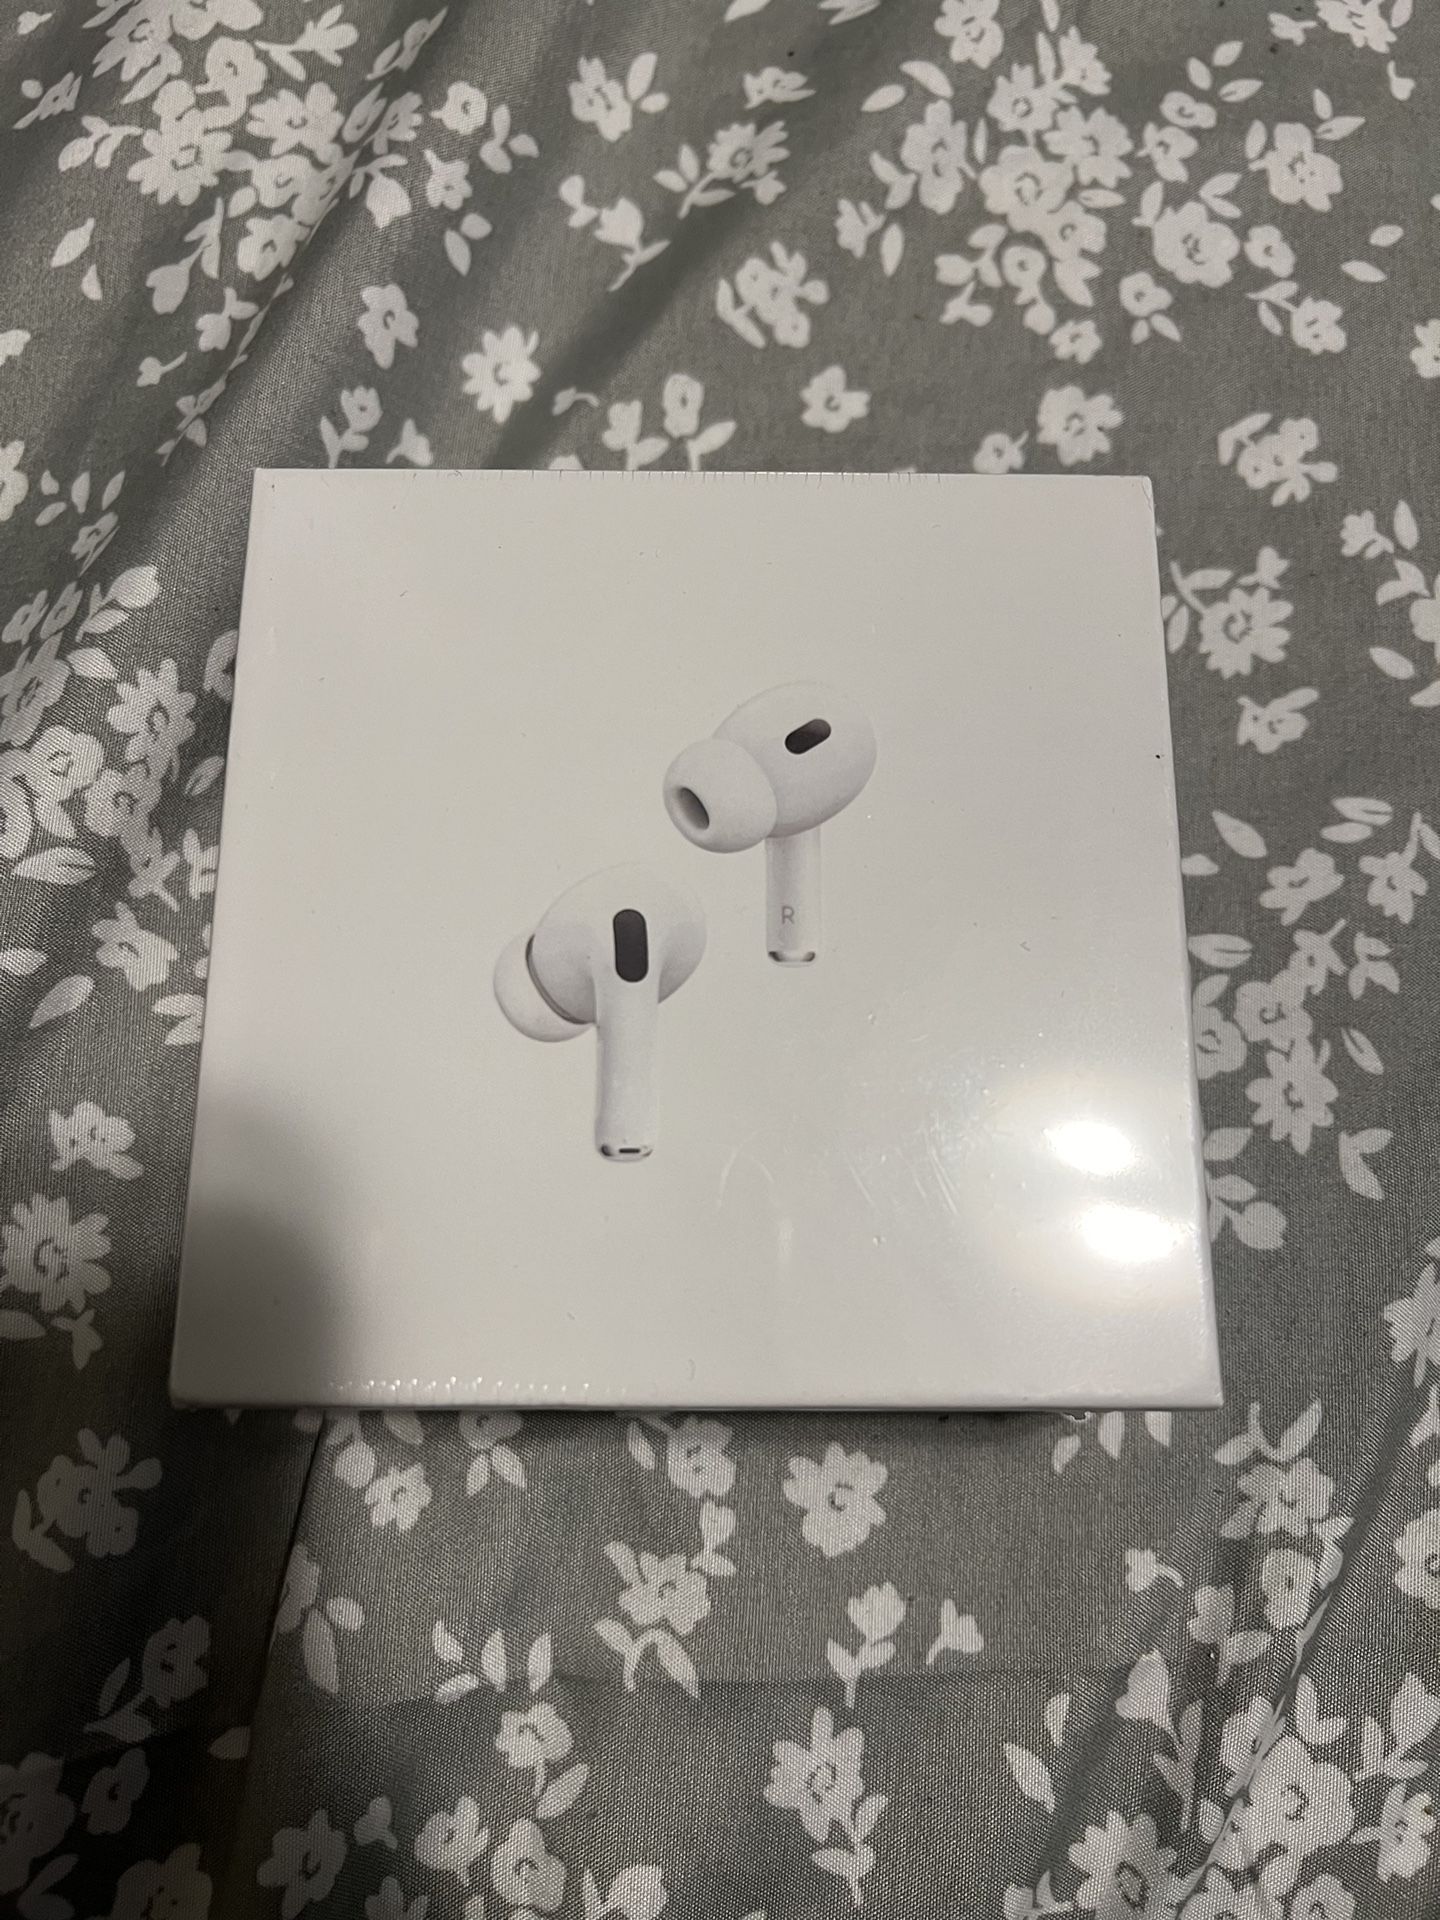 Apple AirPods Pro 2 White In Ear Headphones Second Generation